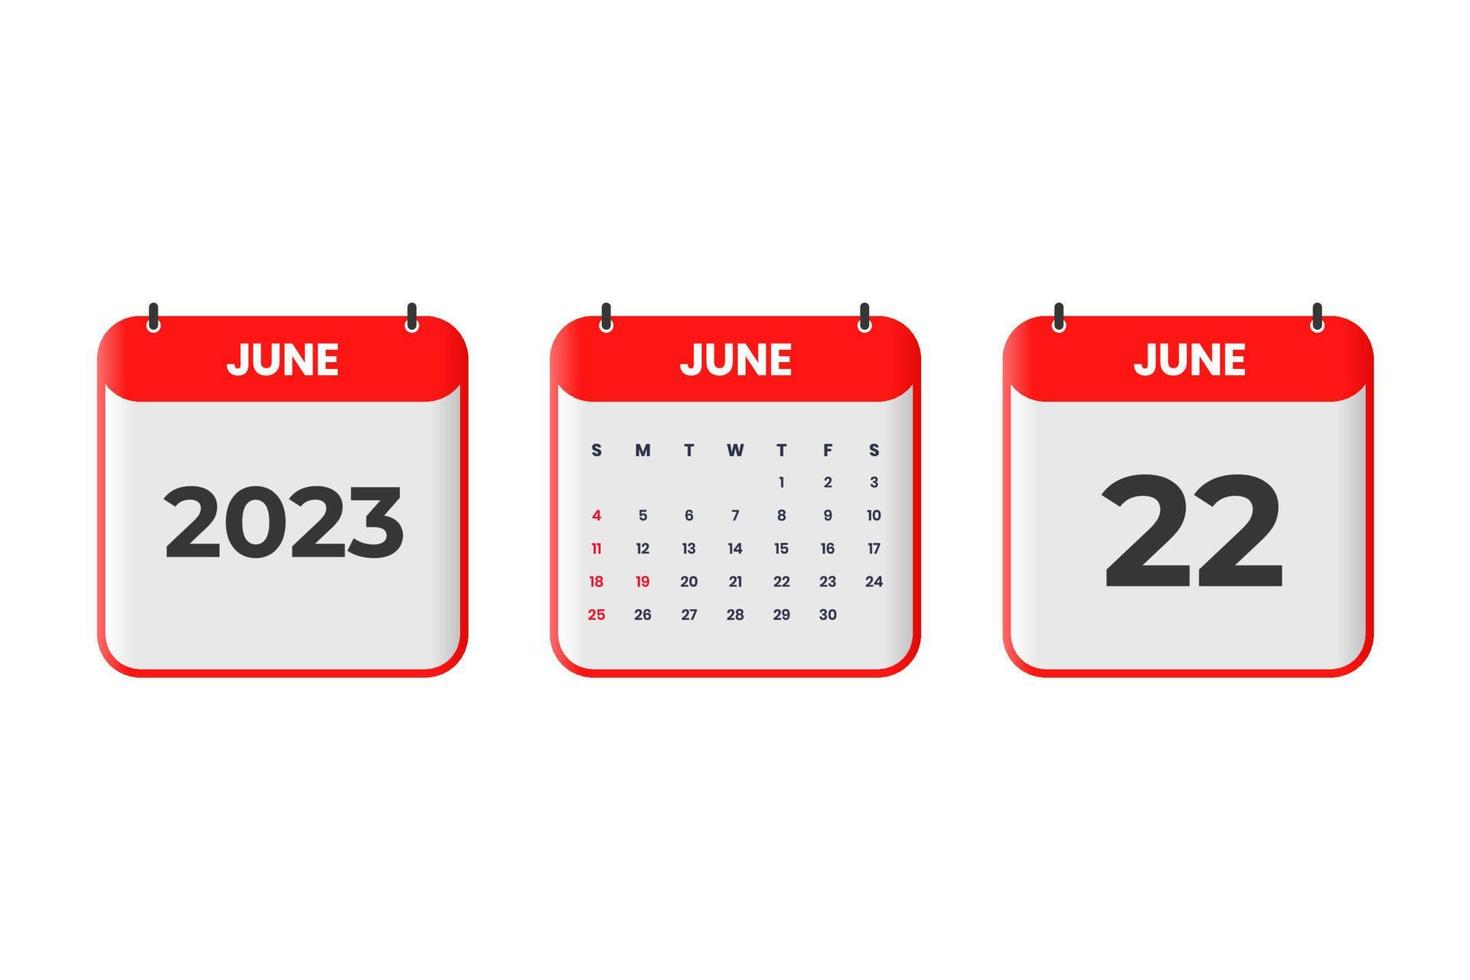 June 2023 calendar design. 22nd June 2023 calendar icon for schedule, appointment, important date concept vector